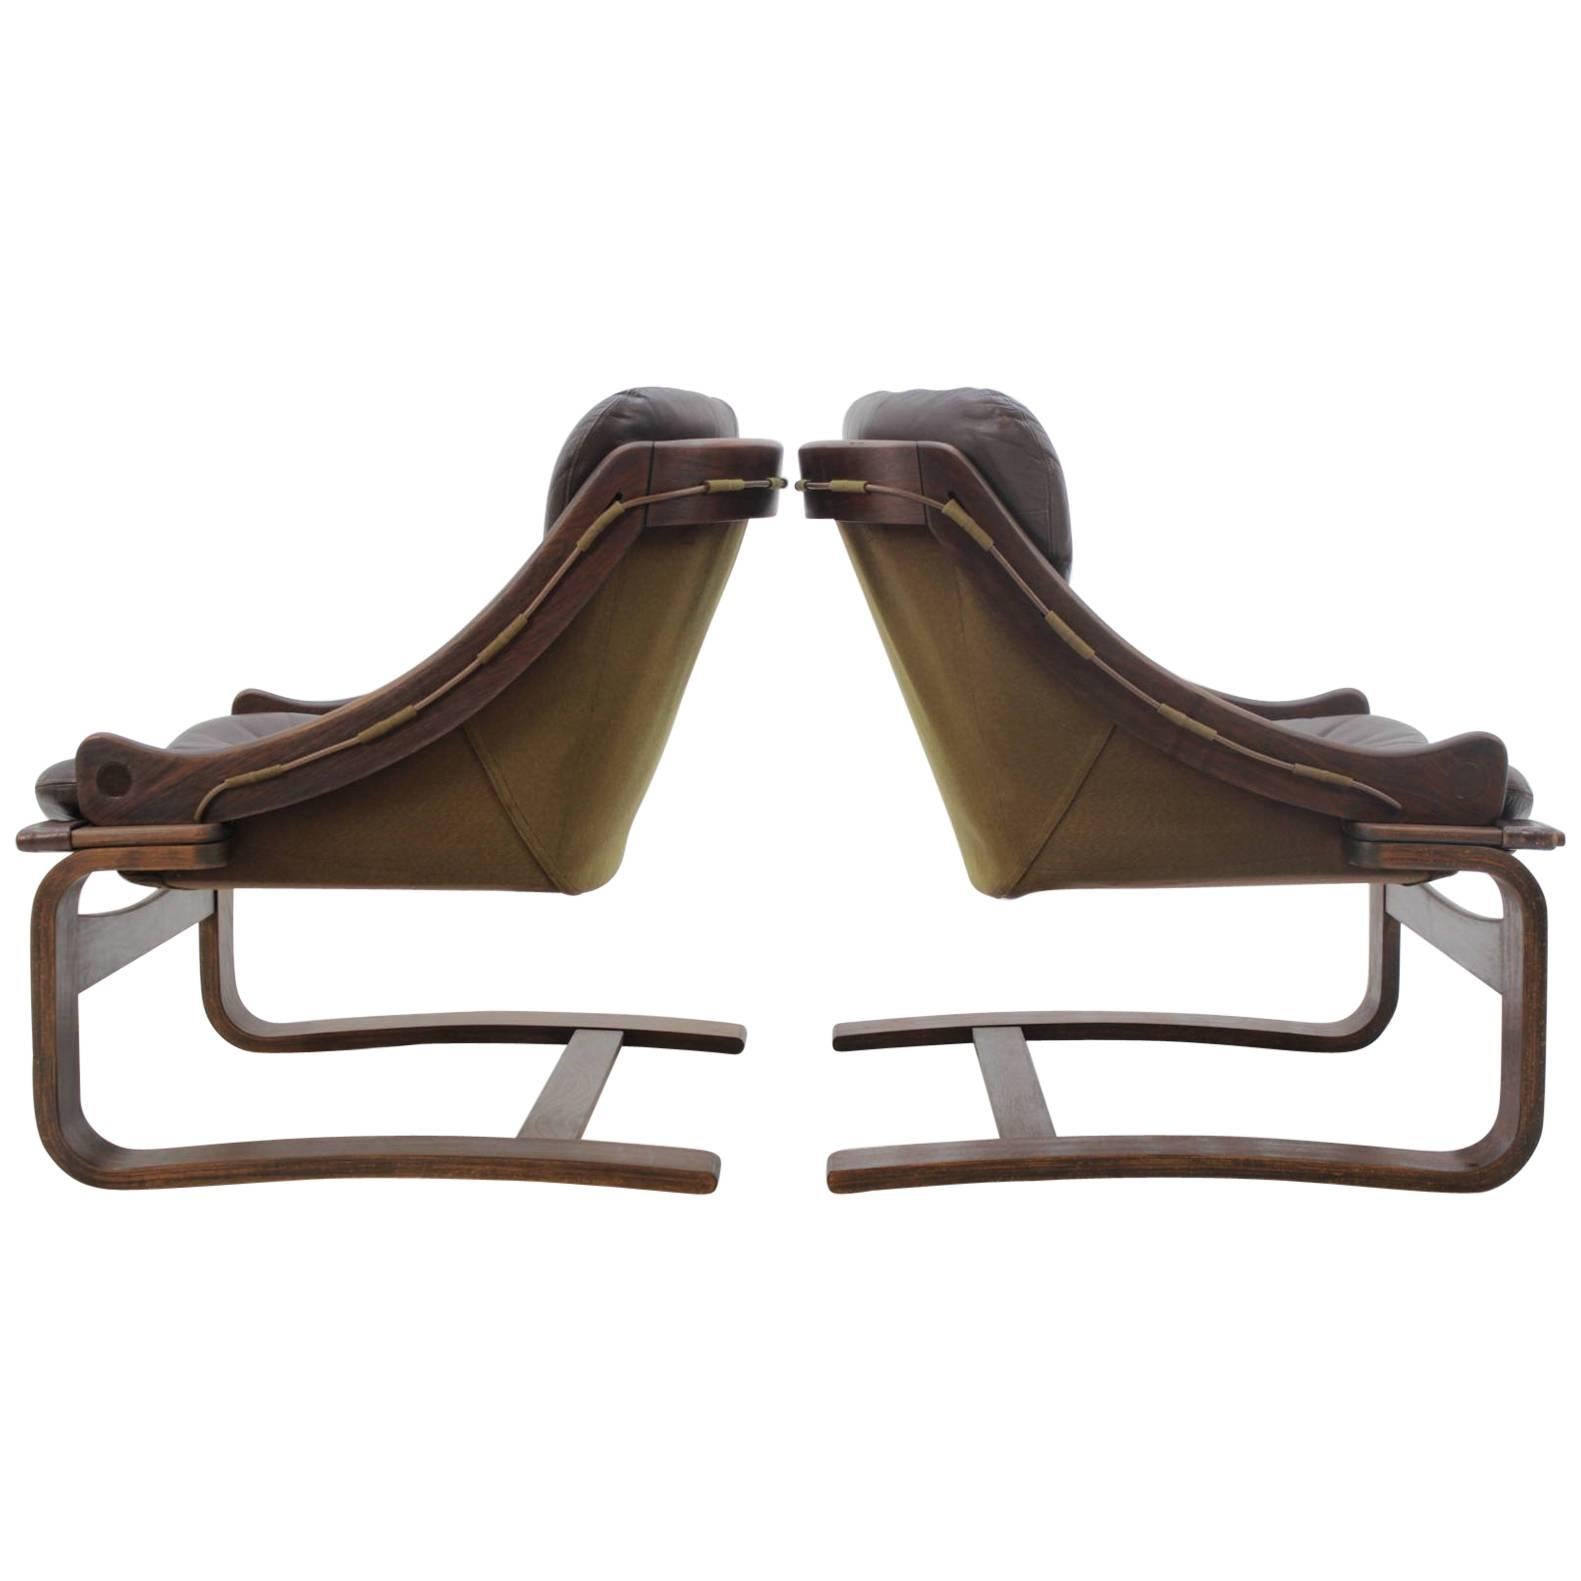 1970s Scandinavian Bentwood Leather Lounge chair by Ake Fribytter for Nelo Mobel